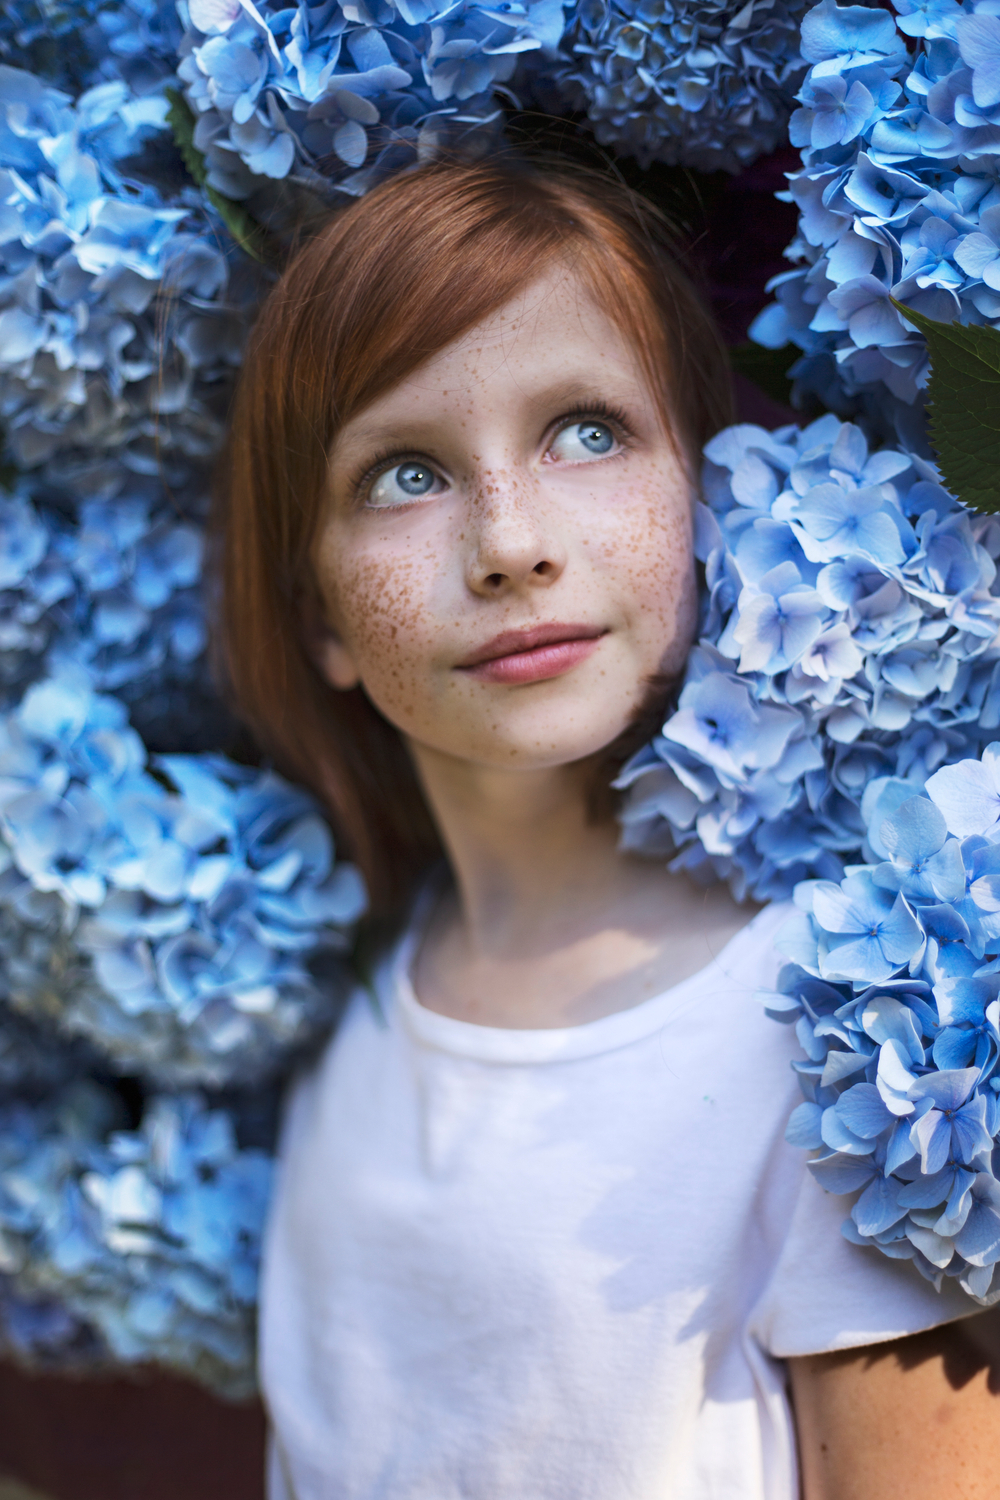 Soft blue flowers and eyes